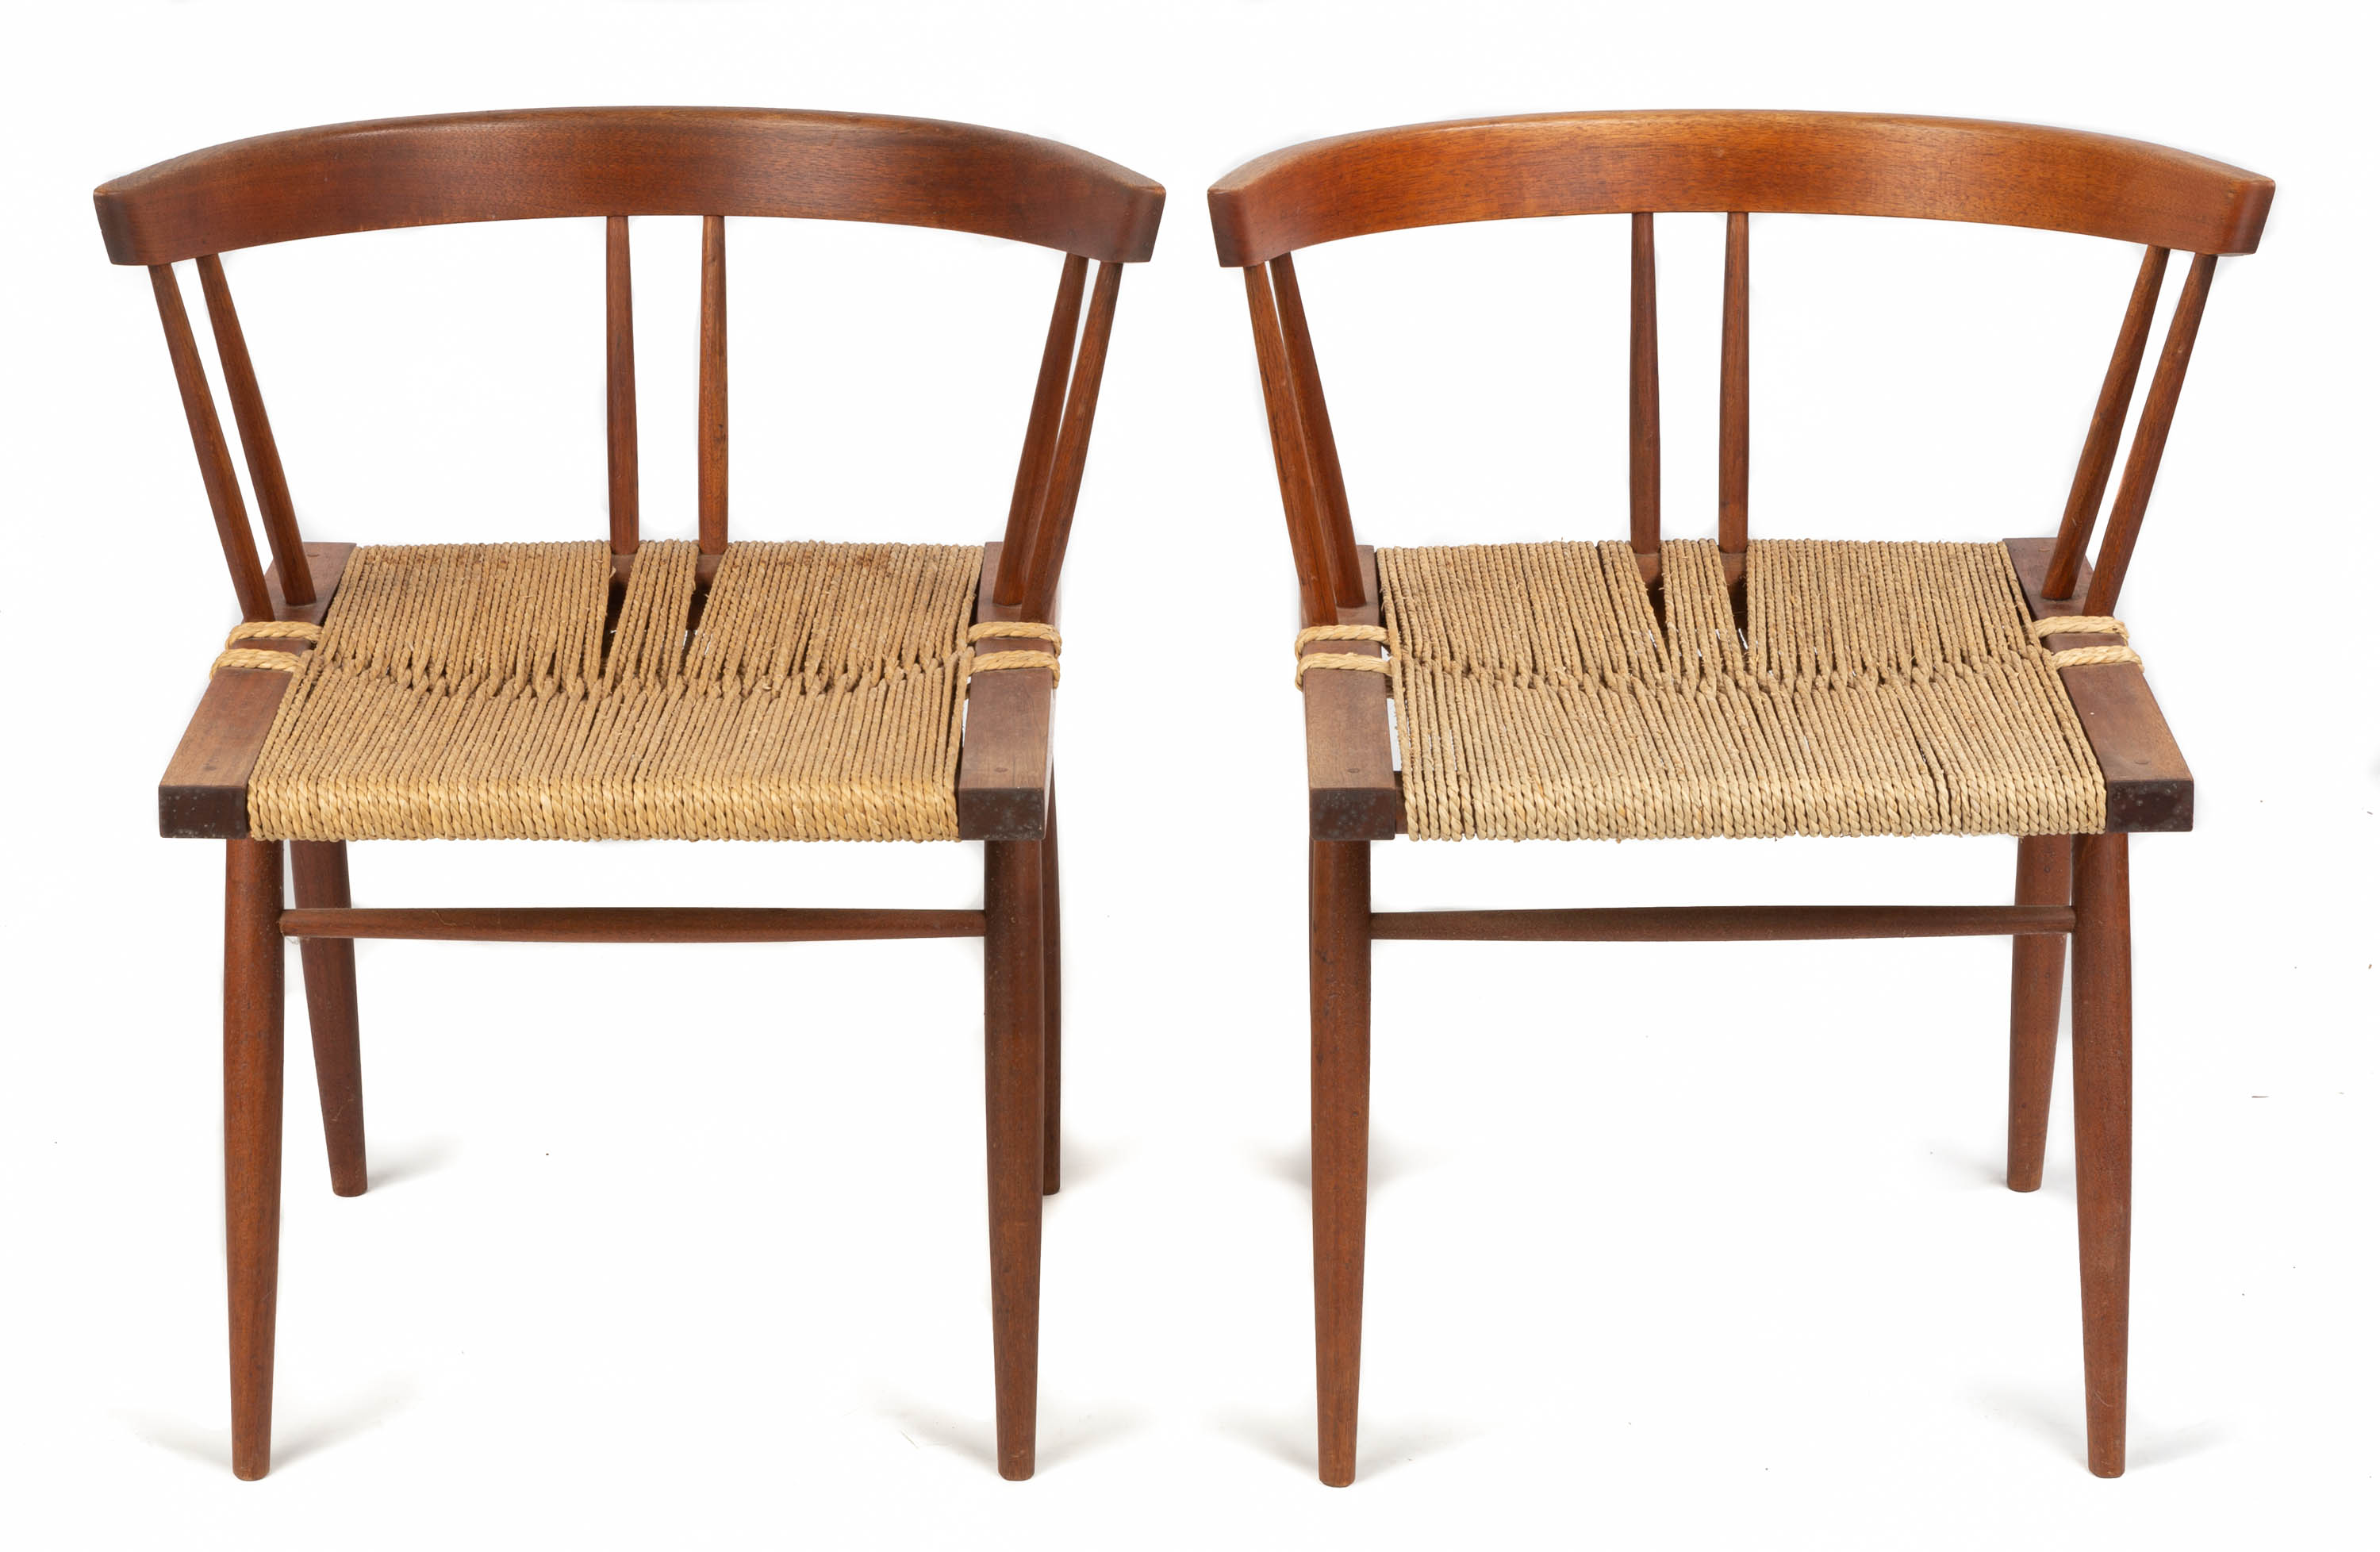 PAIR OF GEORGE NAKASHIMA AMERICAN  28d5ce